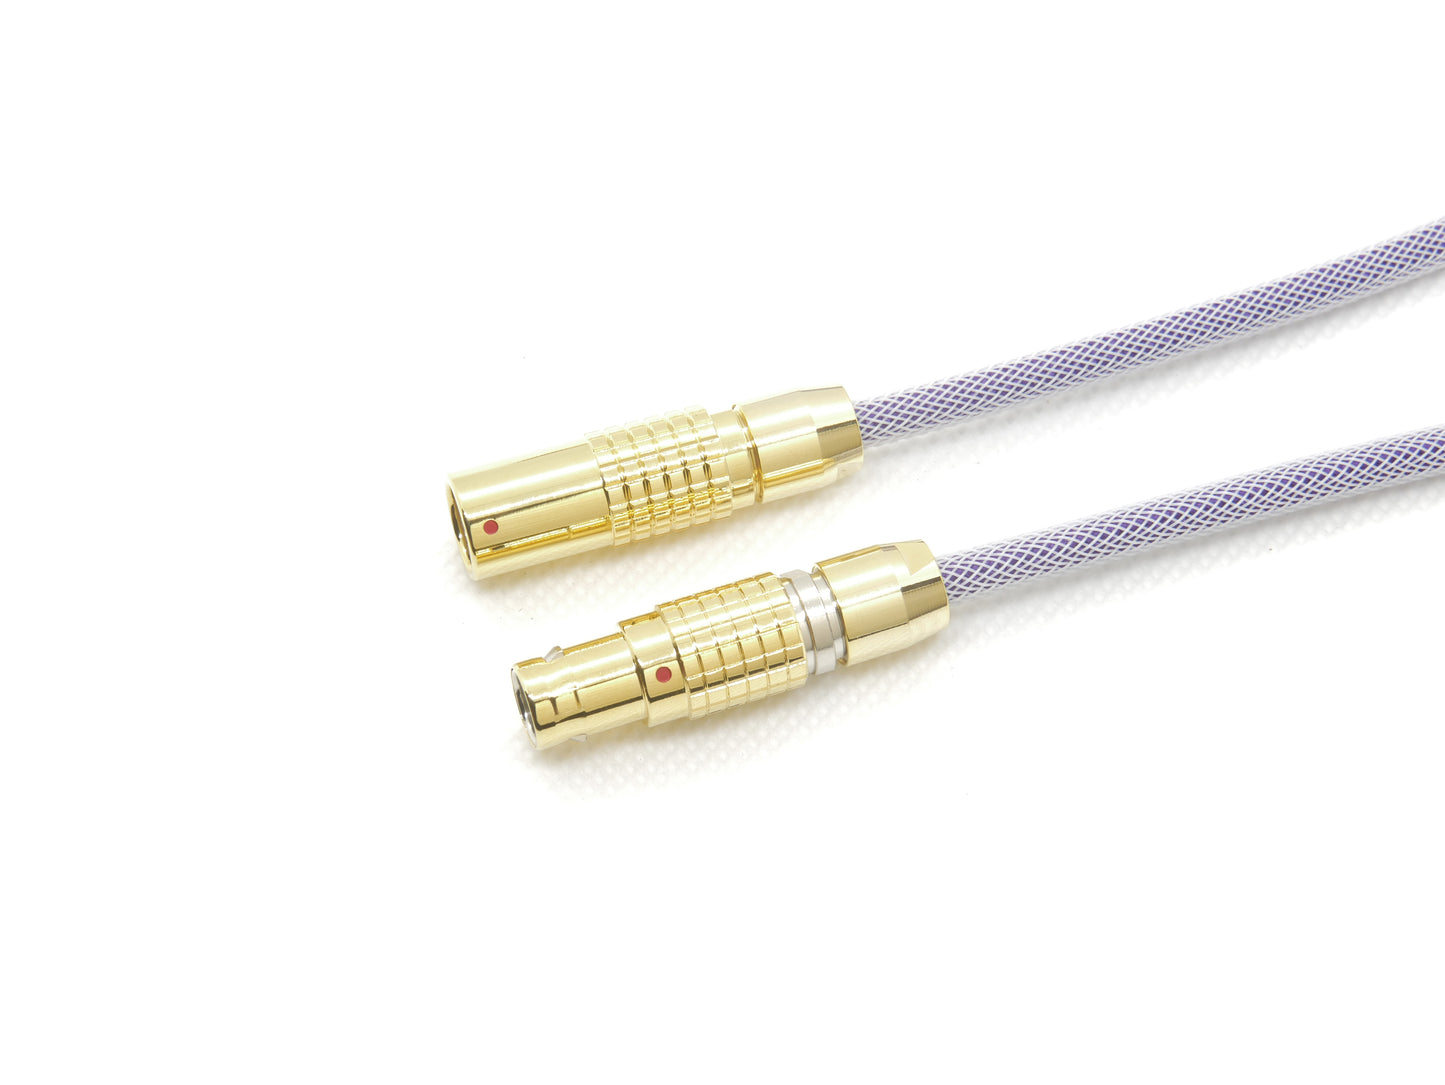 White on Purple Lemo Style Cable